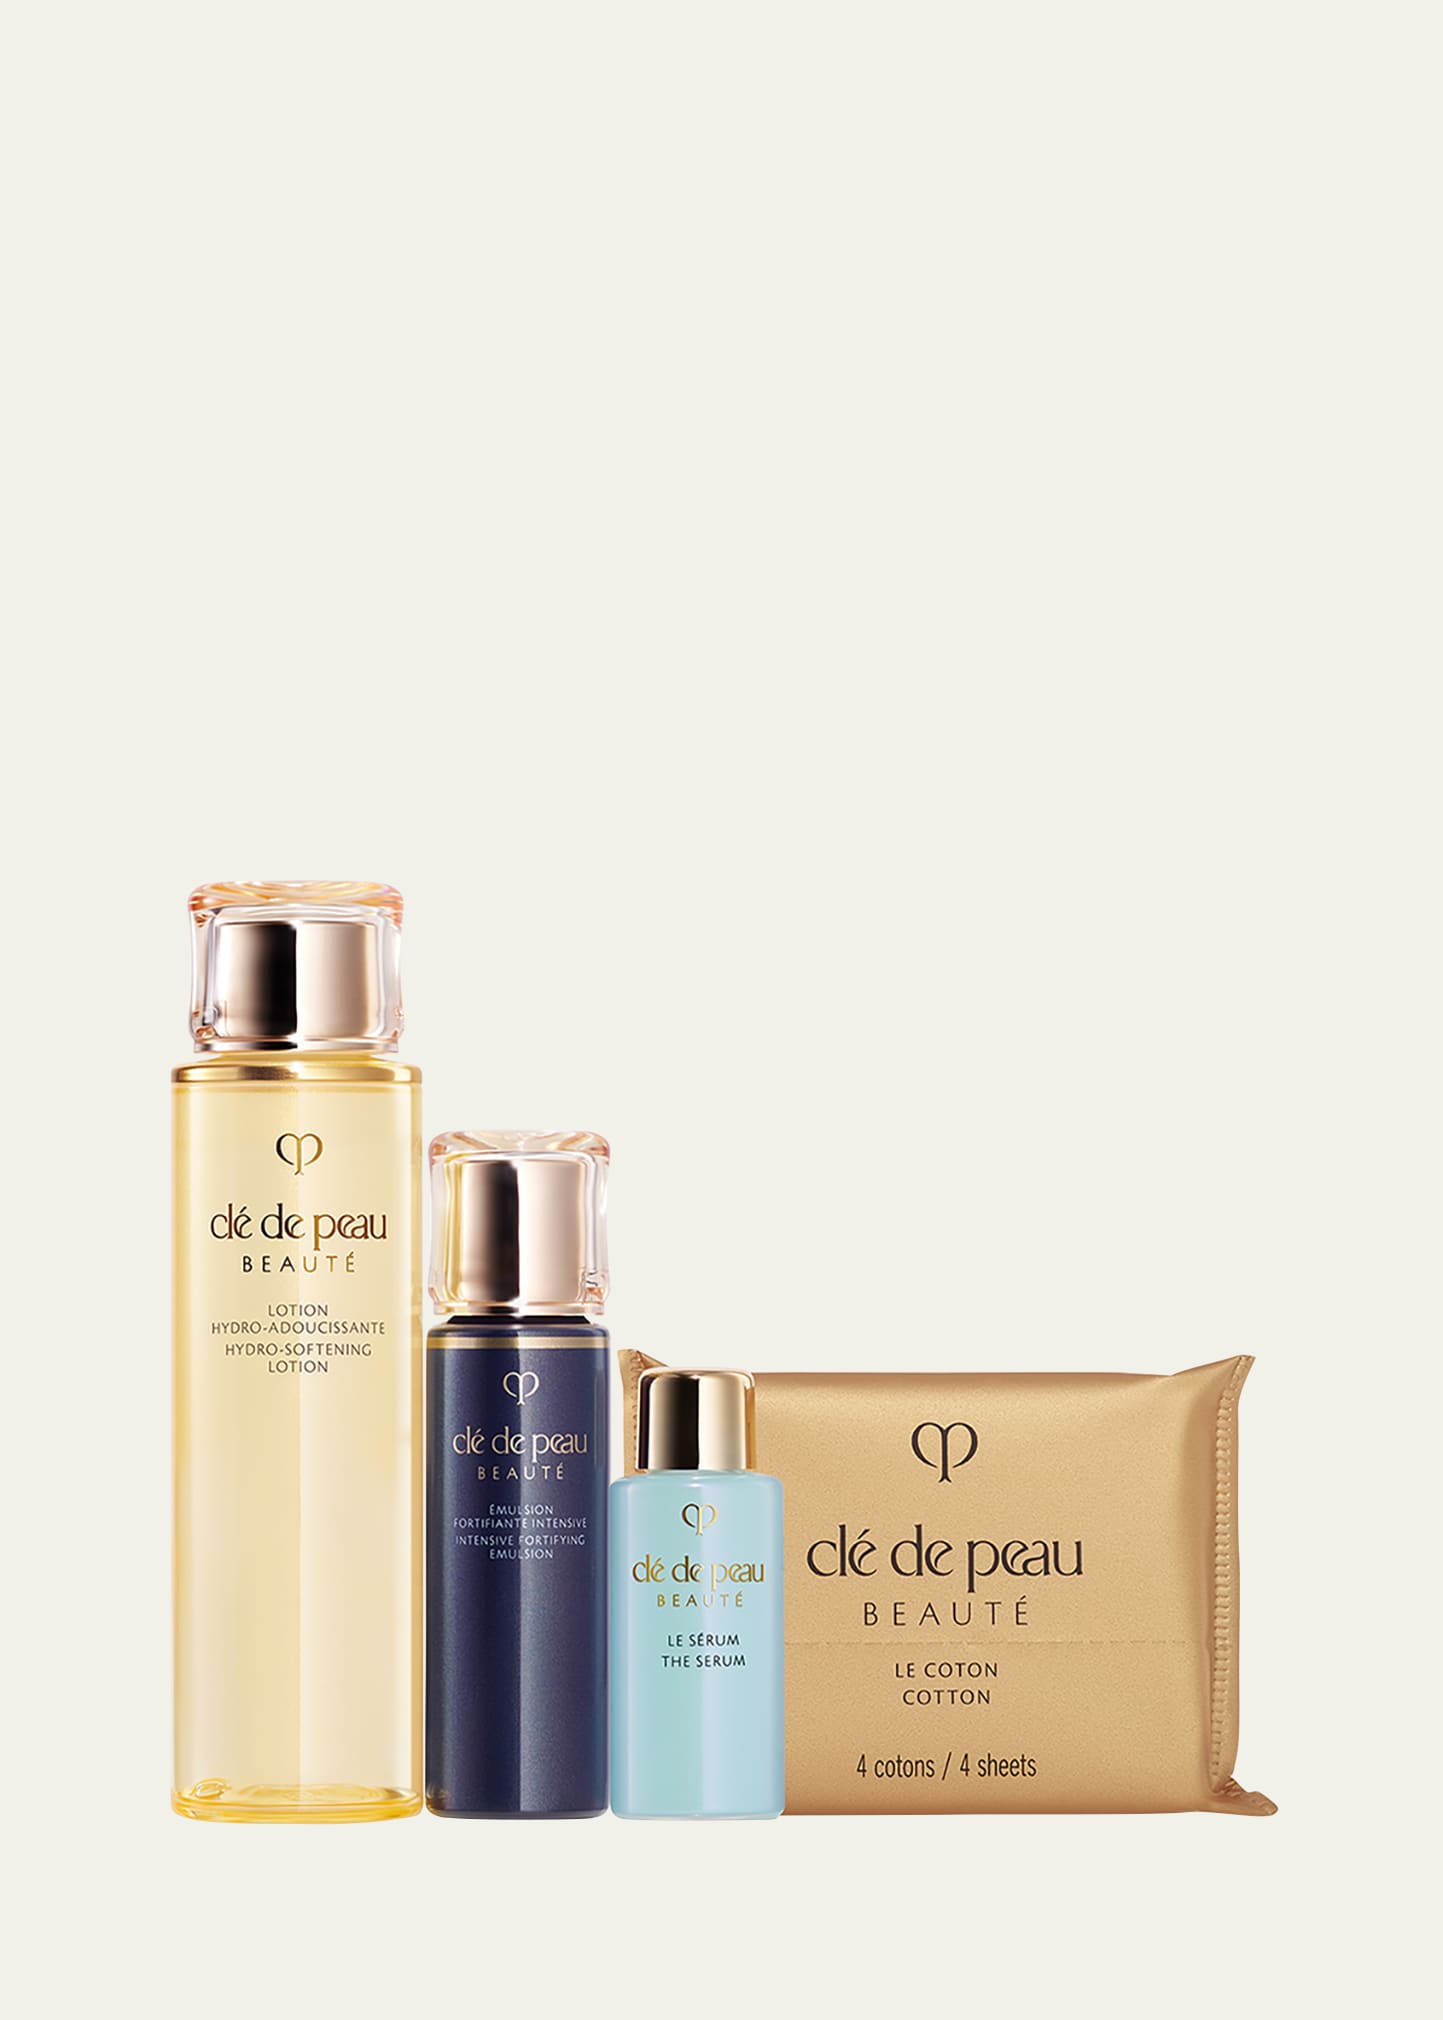 Balance & Hydrate Travel Collection ($143 Value)